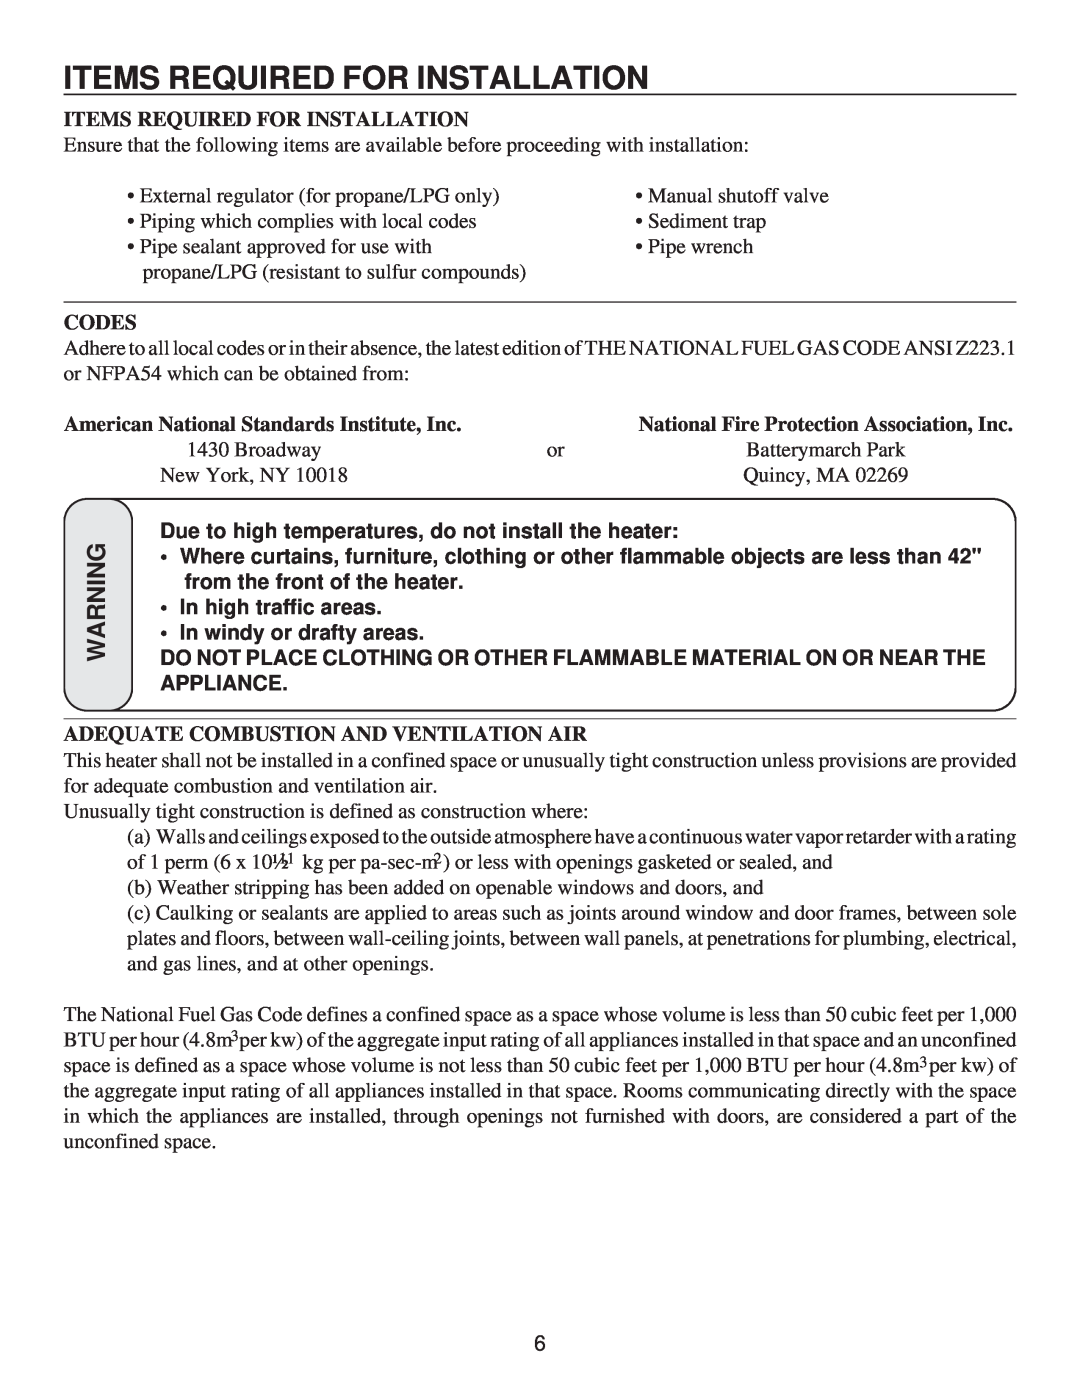 United States Stove G9740L, C9740N manual Items Required For Installation, Codes, American National Standards Institute, Inc 